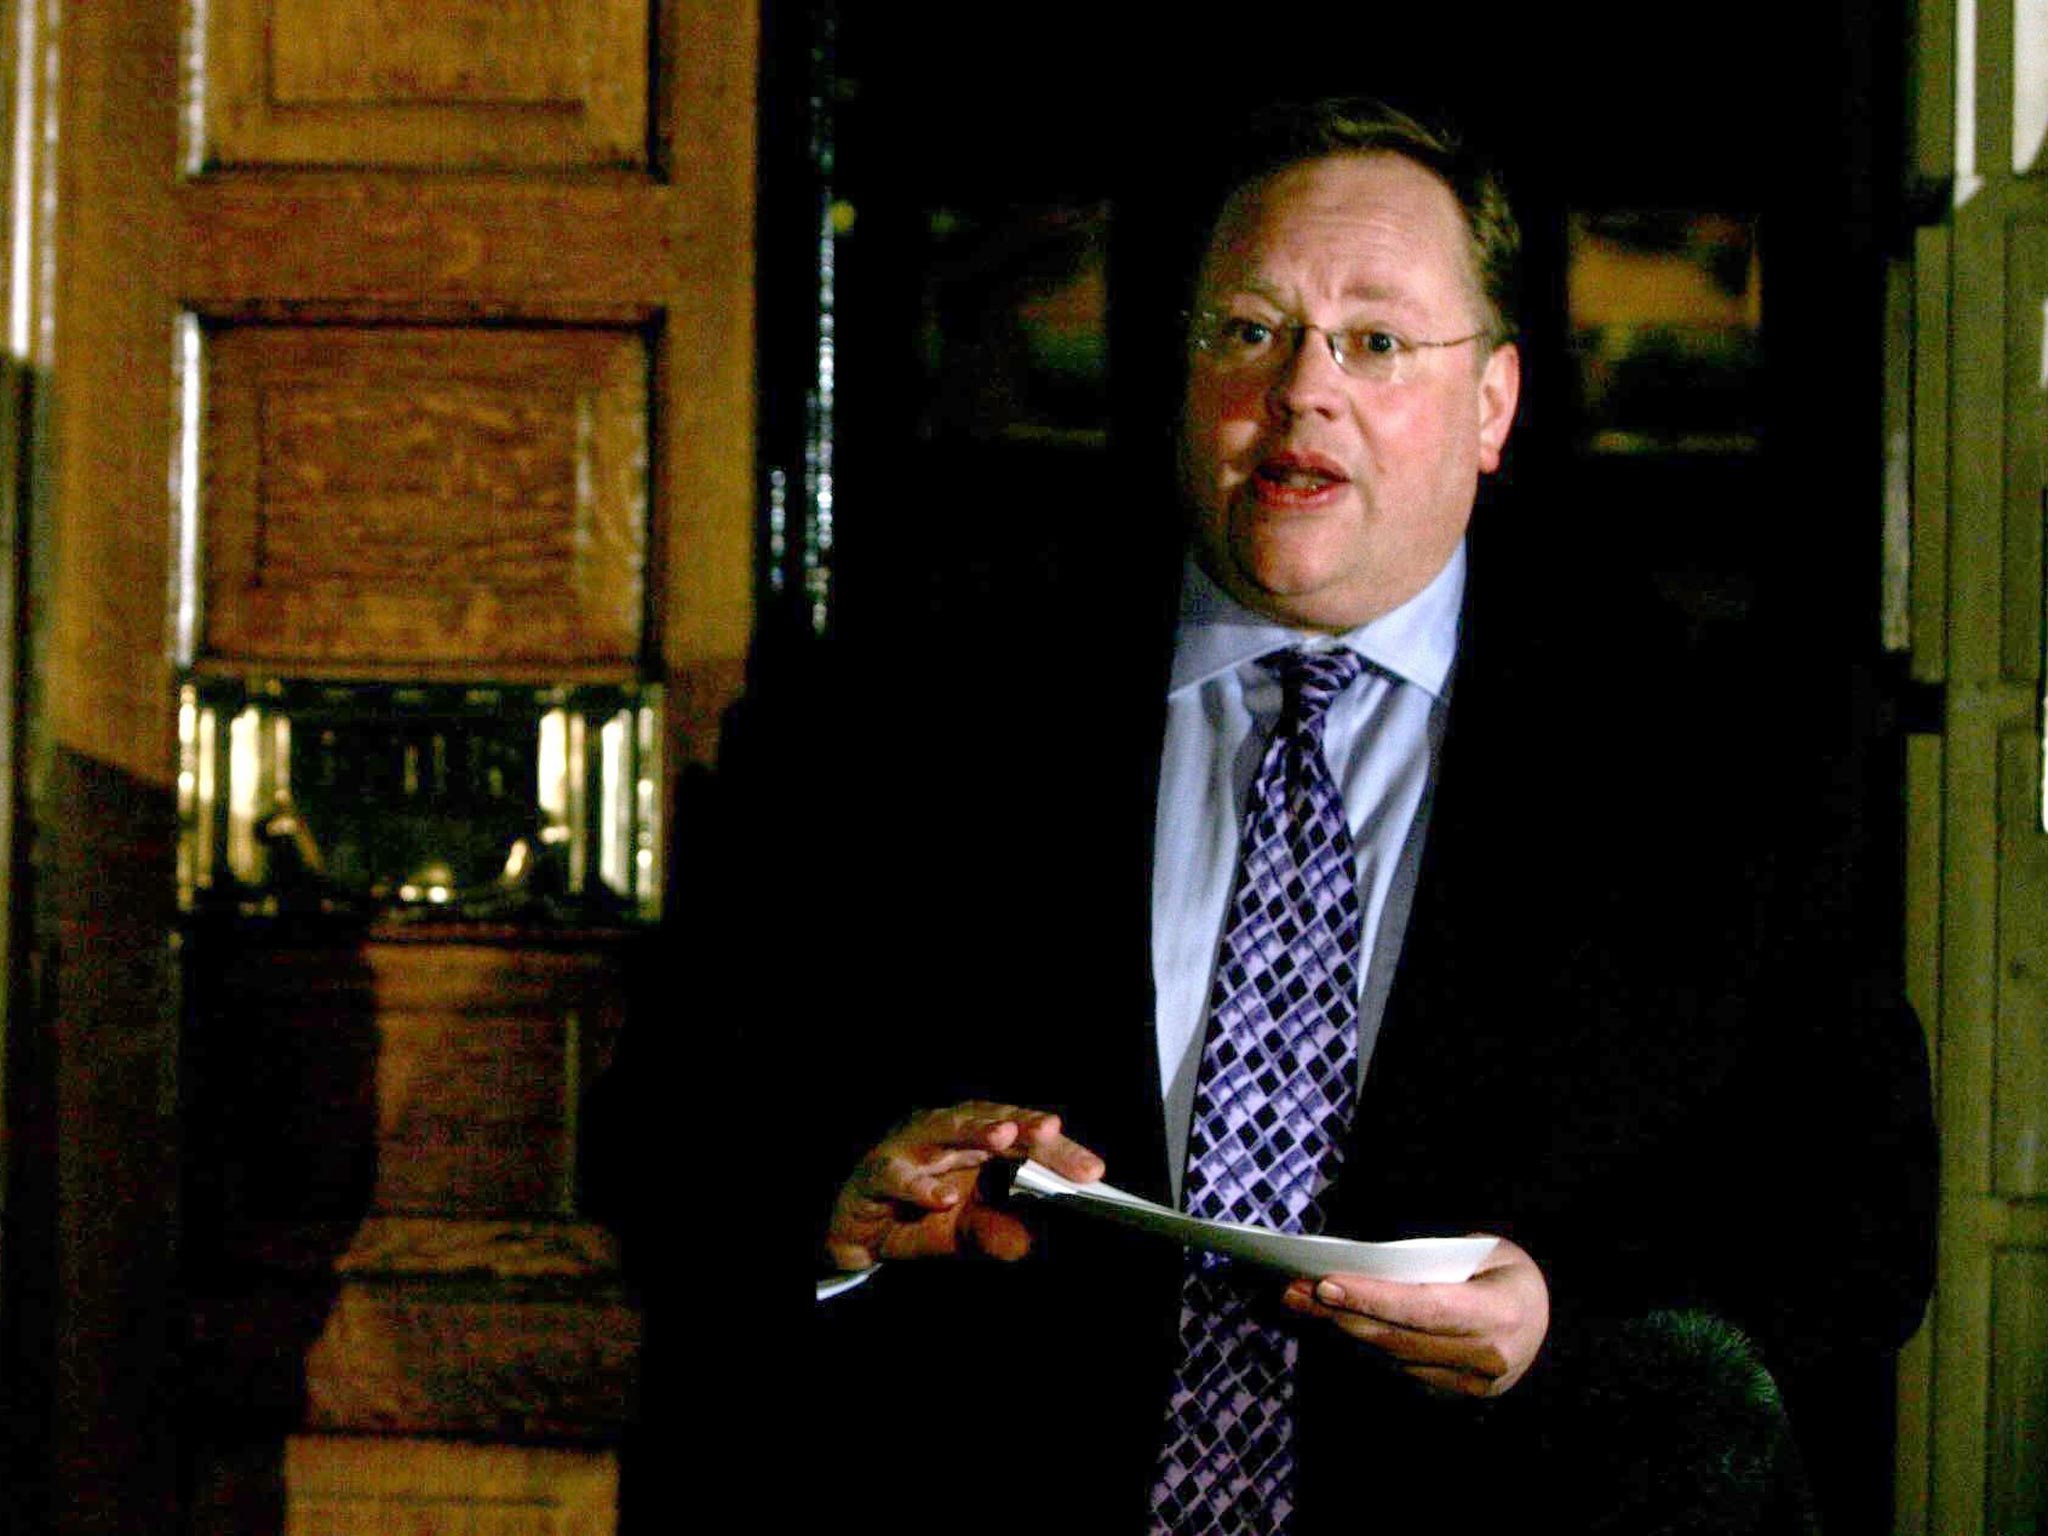 Lord Rennard's apology had been held back in an attempt not to distract from the election campaign